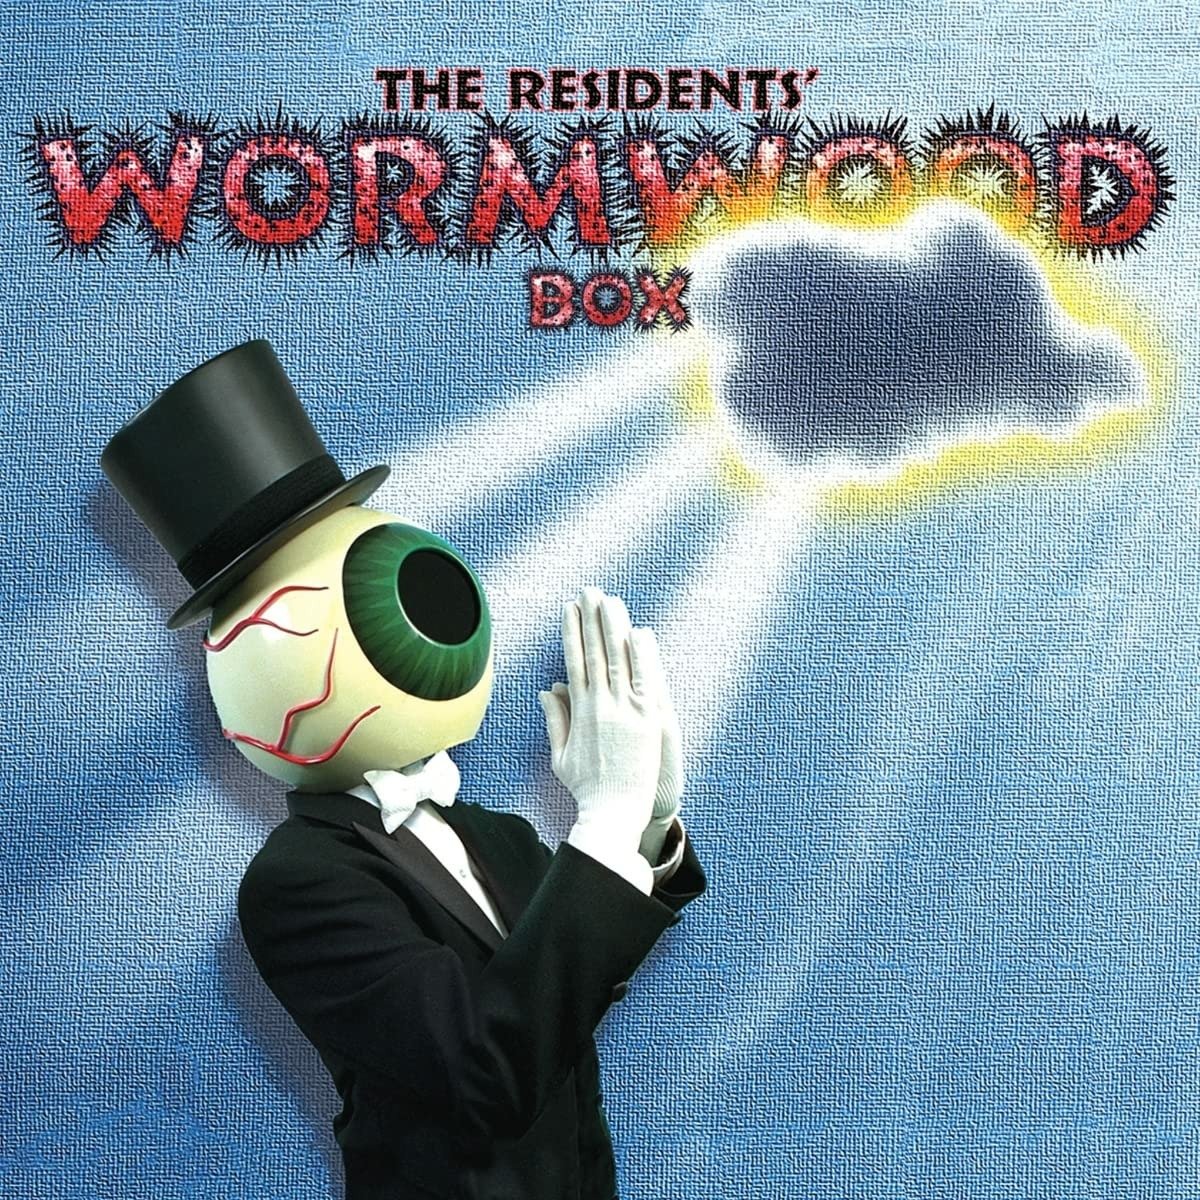 CD Shop - RESIDENTS WORMWOOD BOX - CURIOUS STORIES FROM THE BIBLE